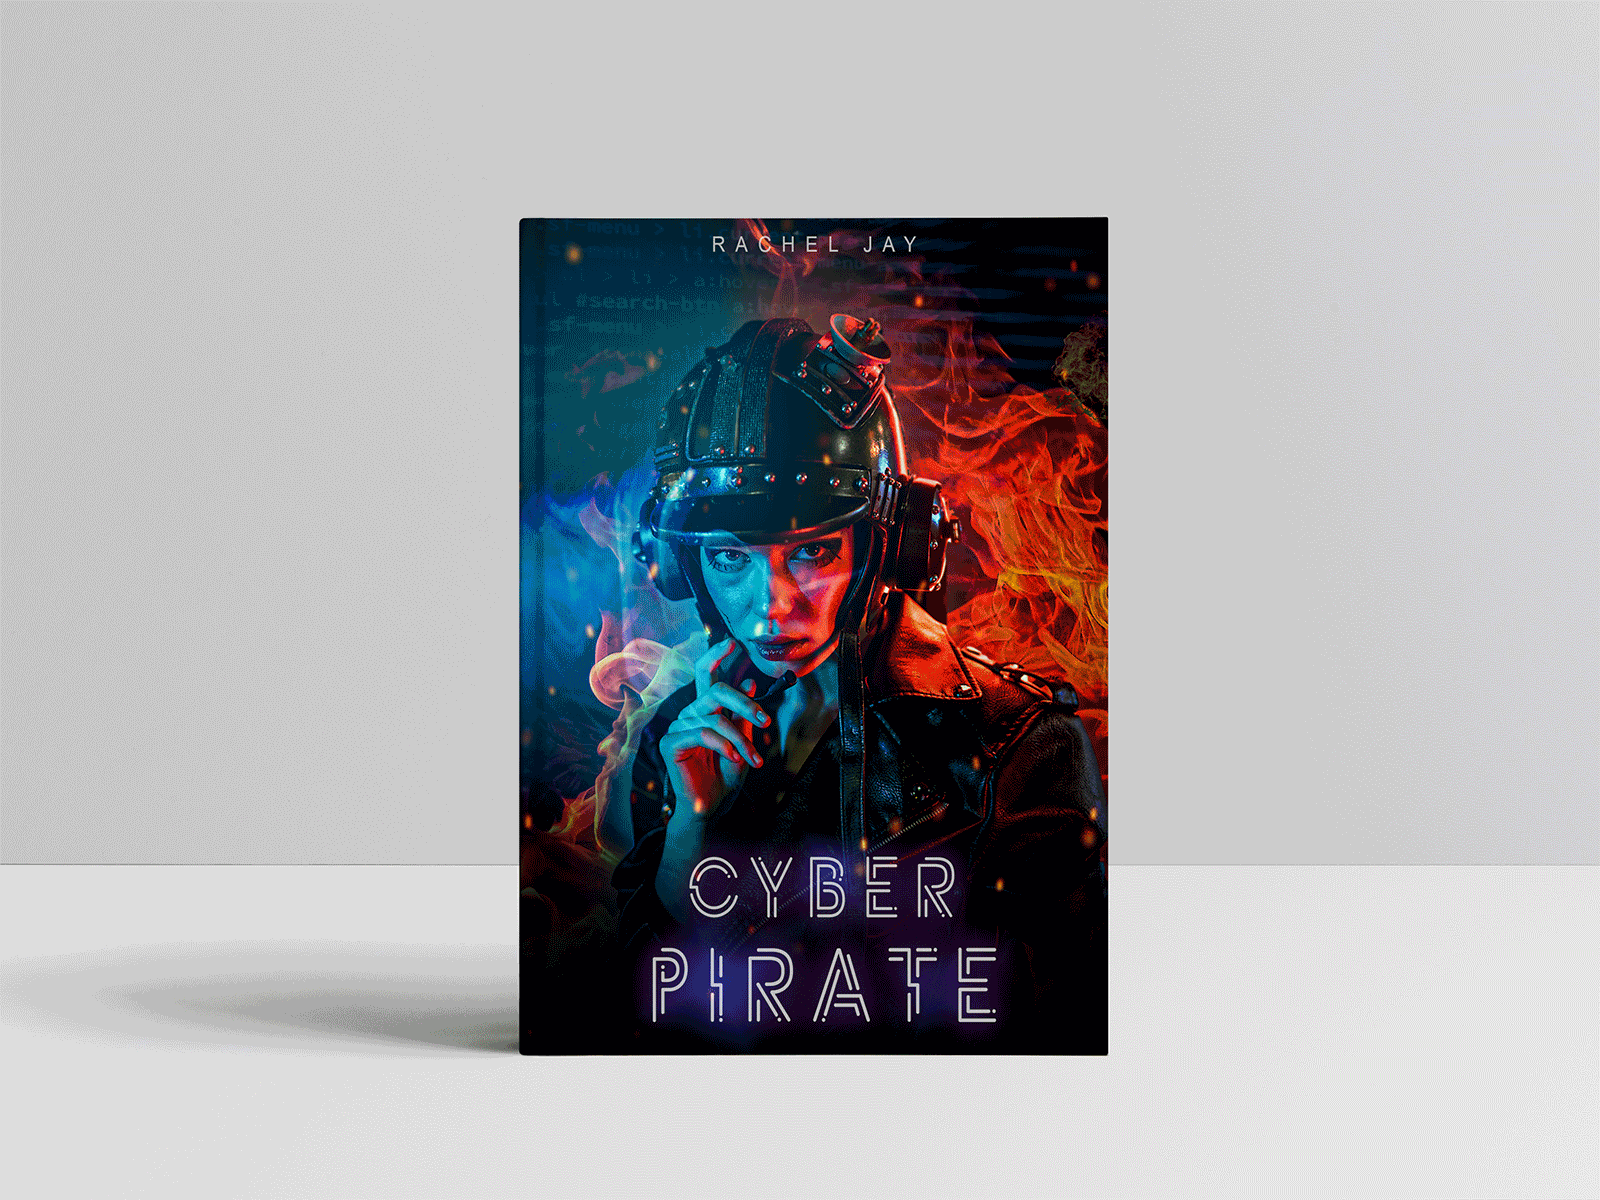 Book Cover Designs biography book cover book design design fiction book cover graphic design illustration illustrative book cover illustrator indesign malayalam memoirs photographic cover photoshop romantic science fiction sketchbook pro typography